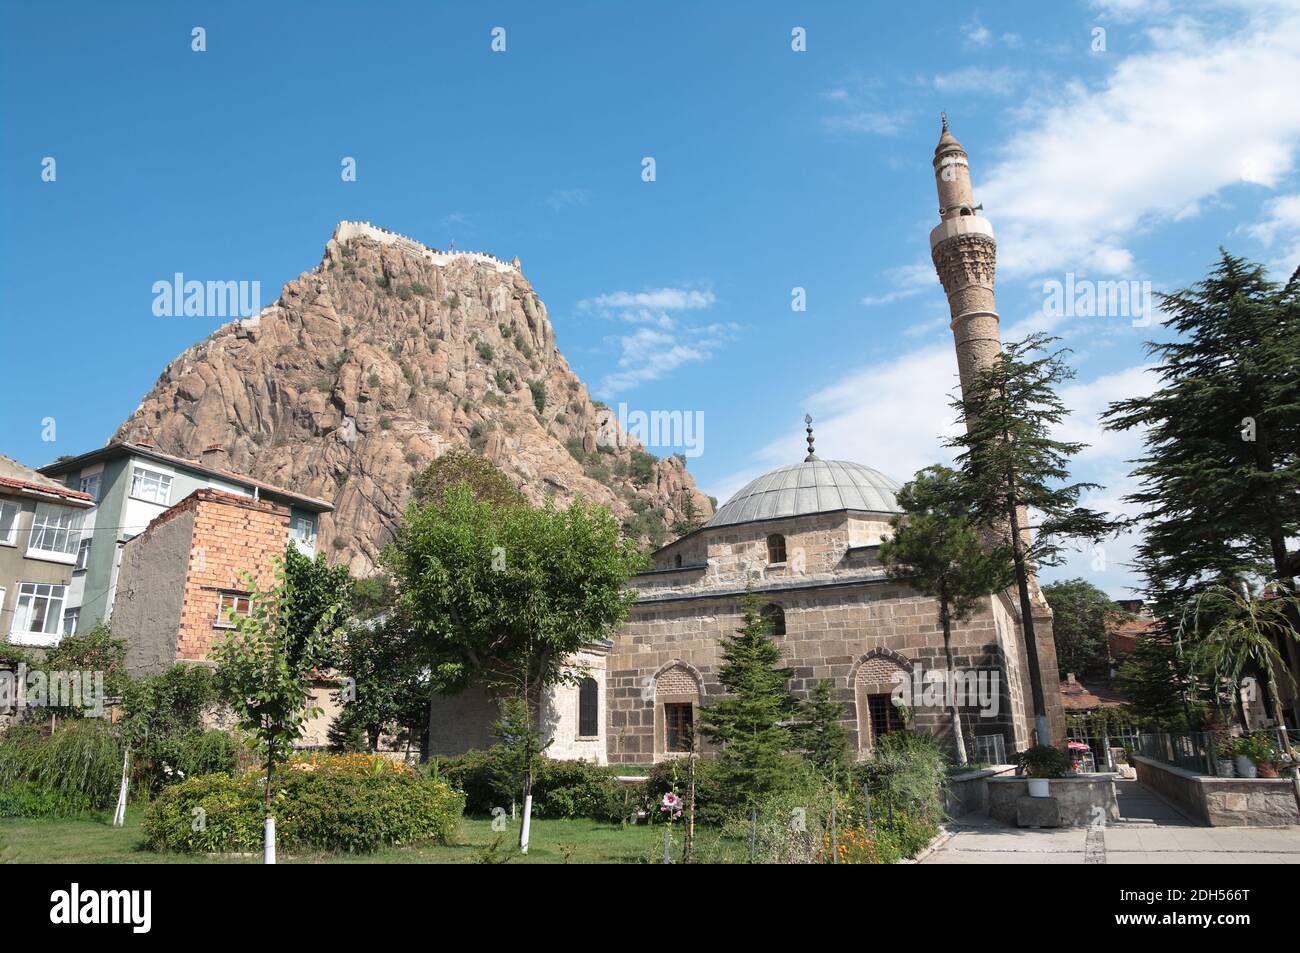 rock topped by kale or Hisar (citadel) as a colossus dominates Afyon, Turkey Stock Photo